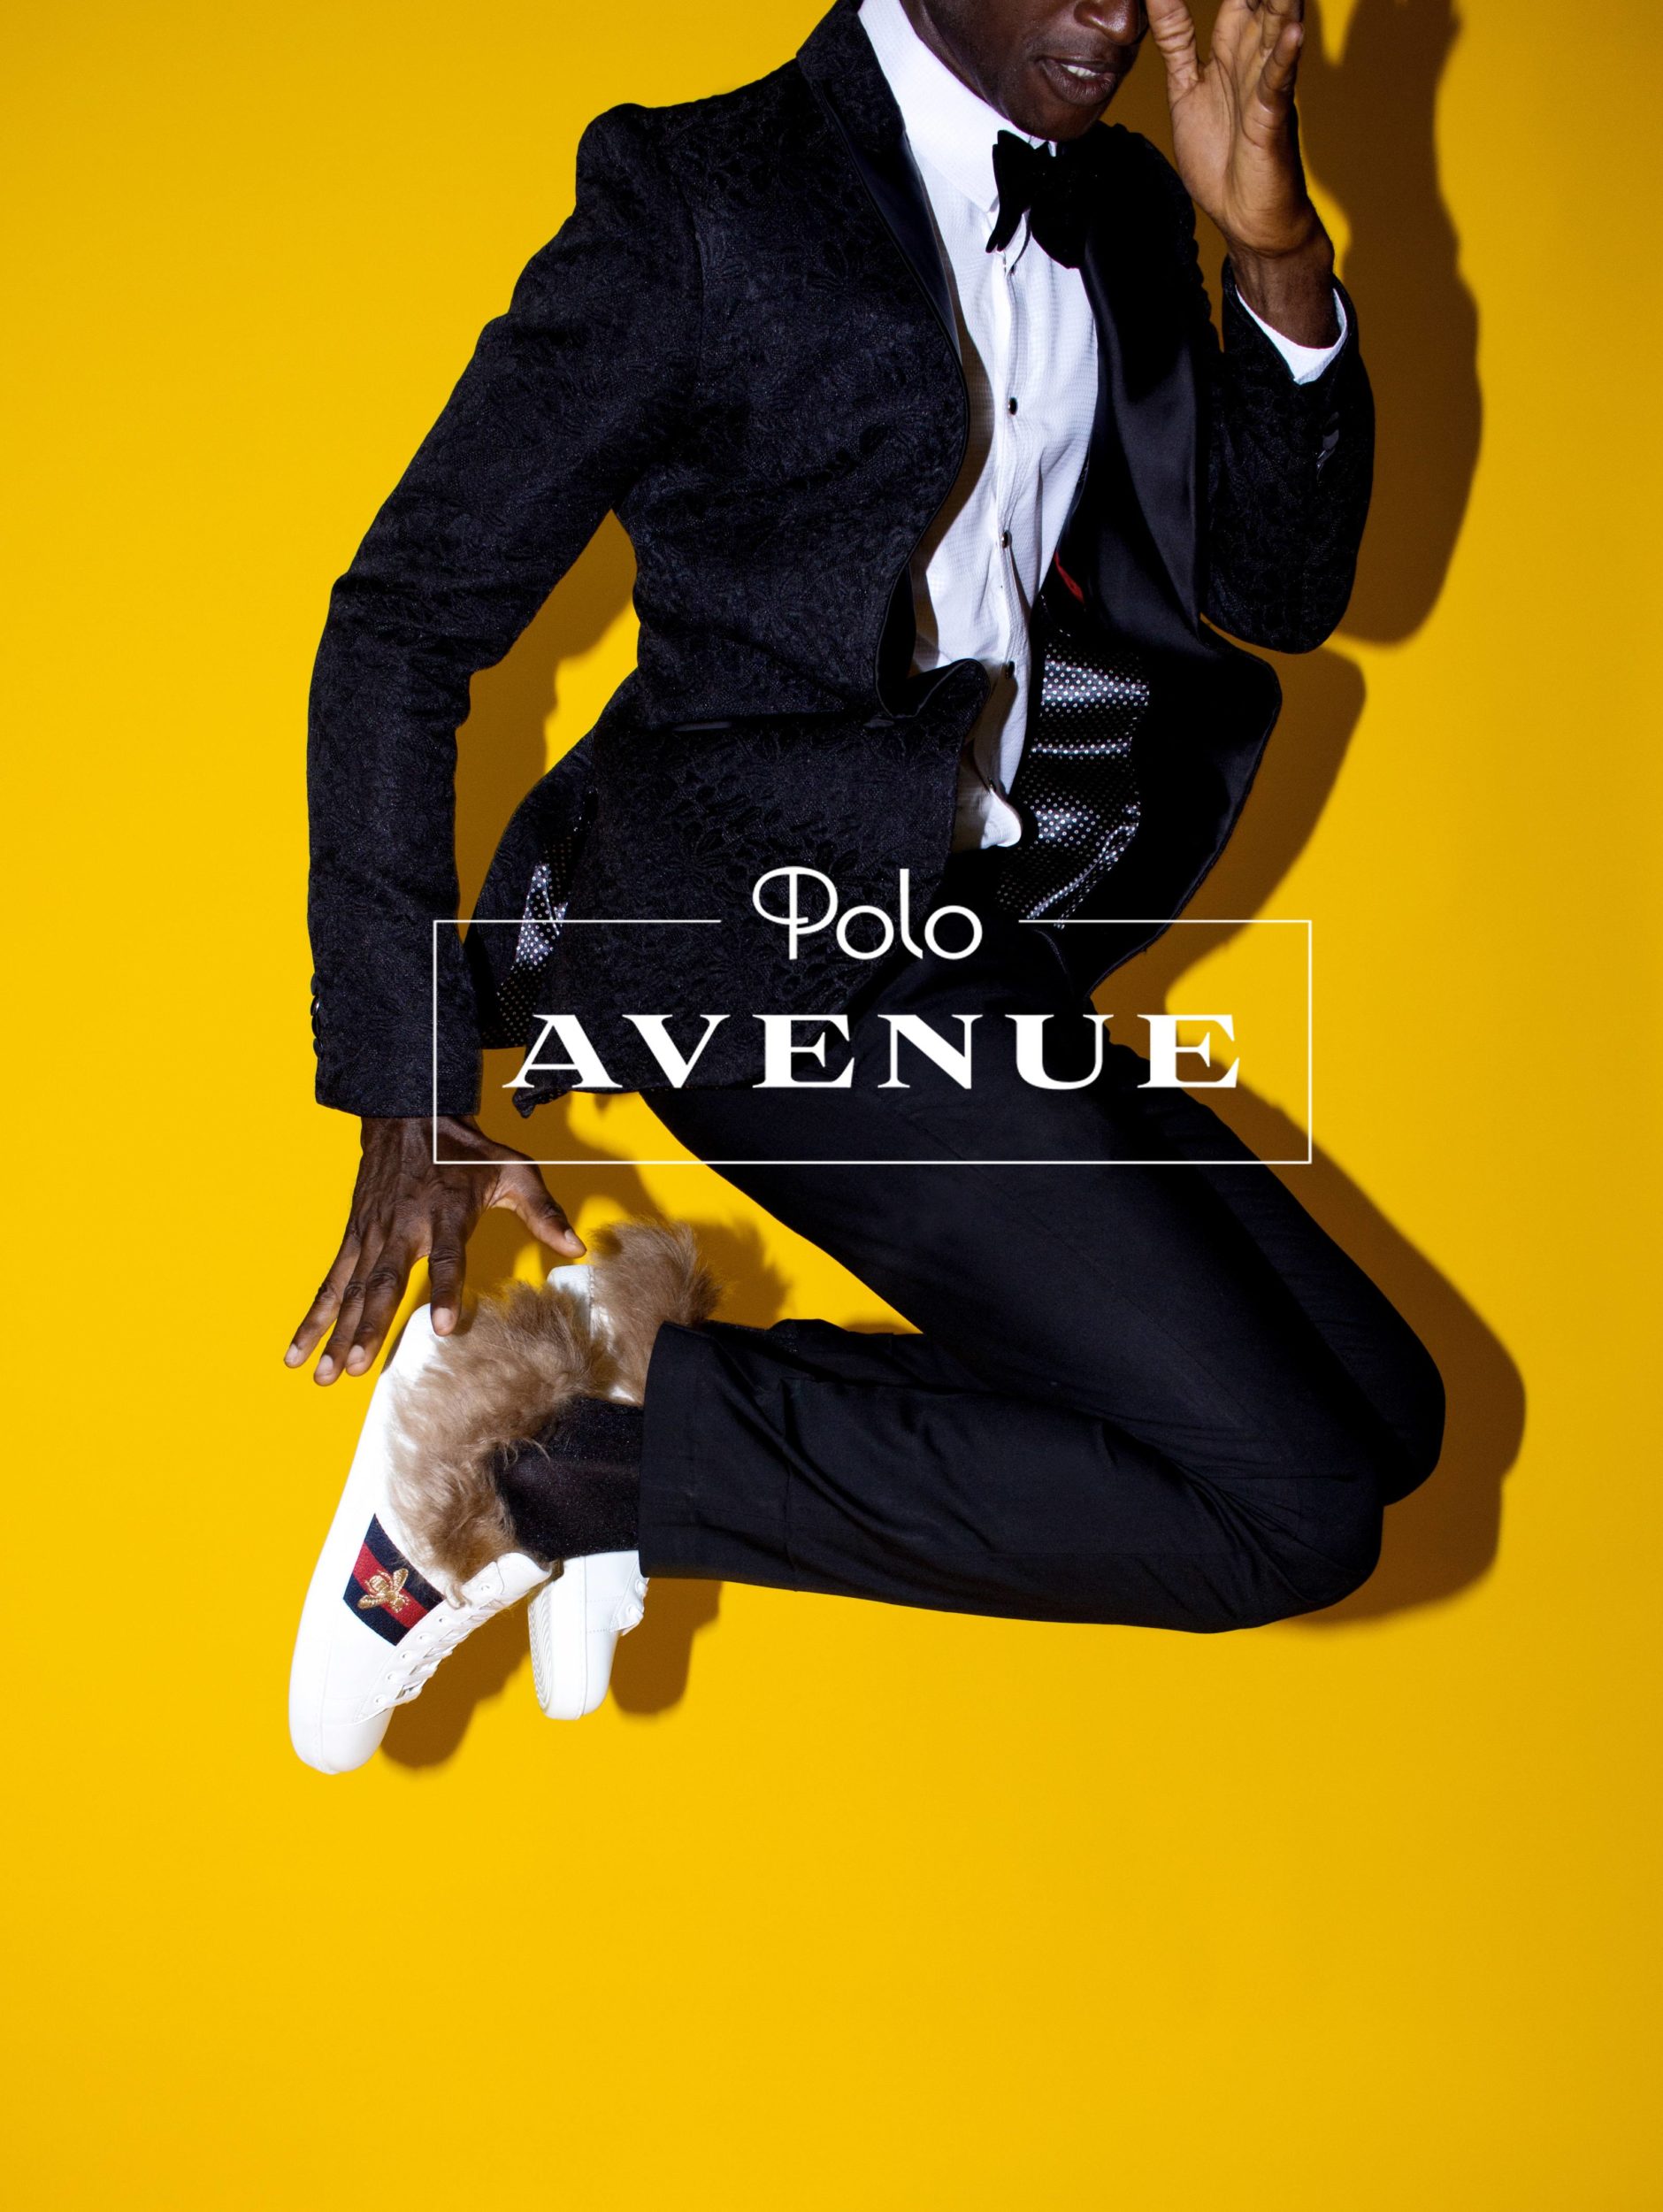 Polo Avenue’s Spring Summer 2018 Campaign is All About The Pop!